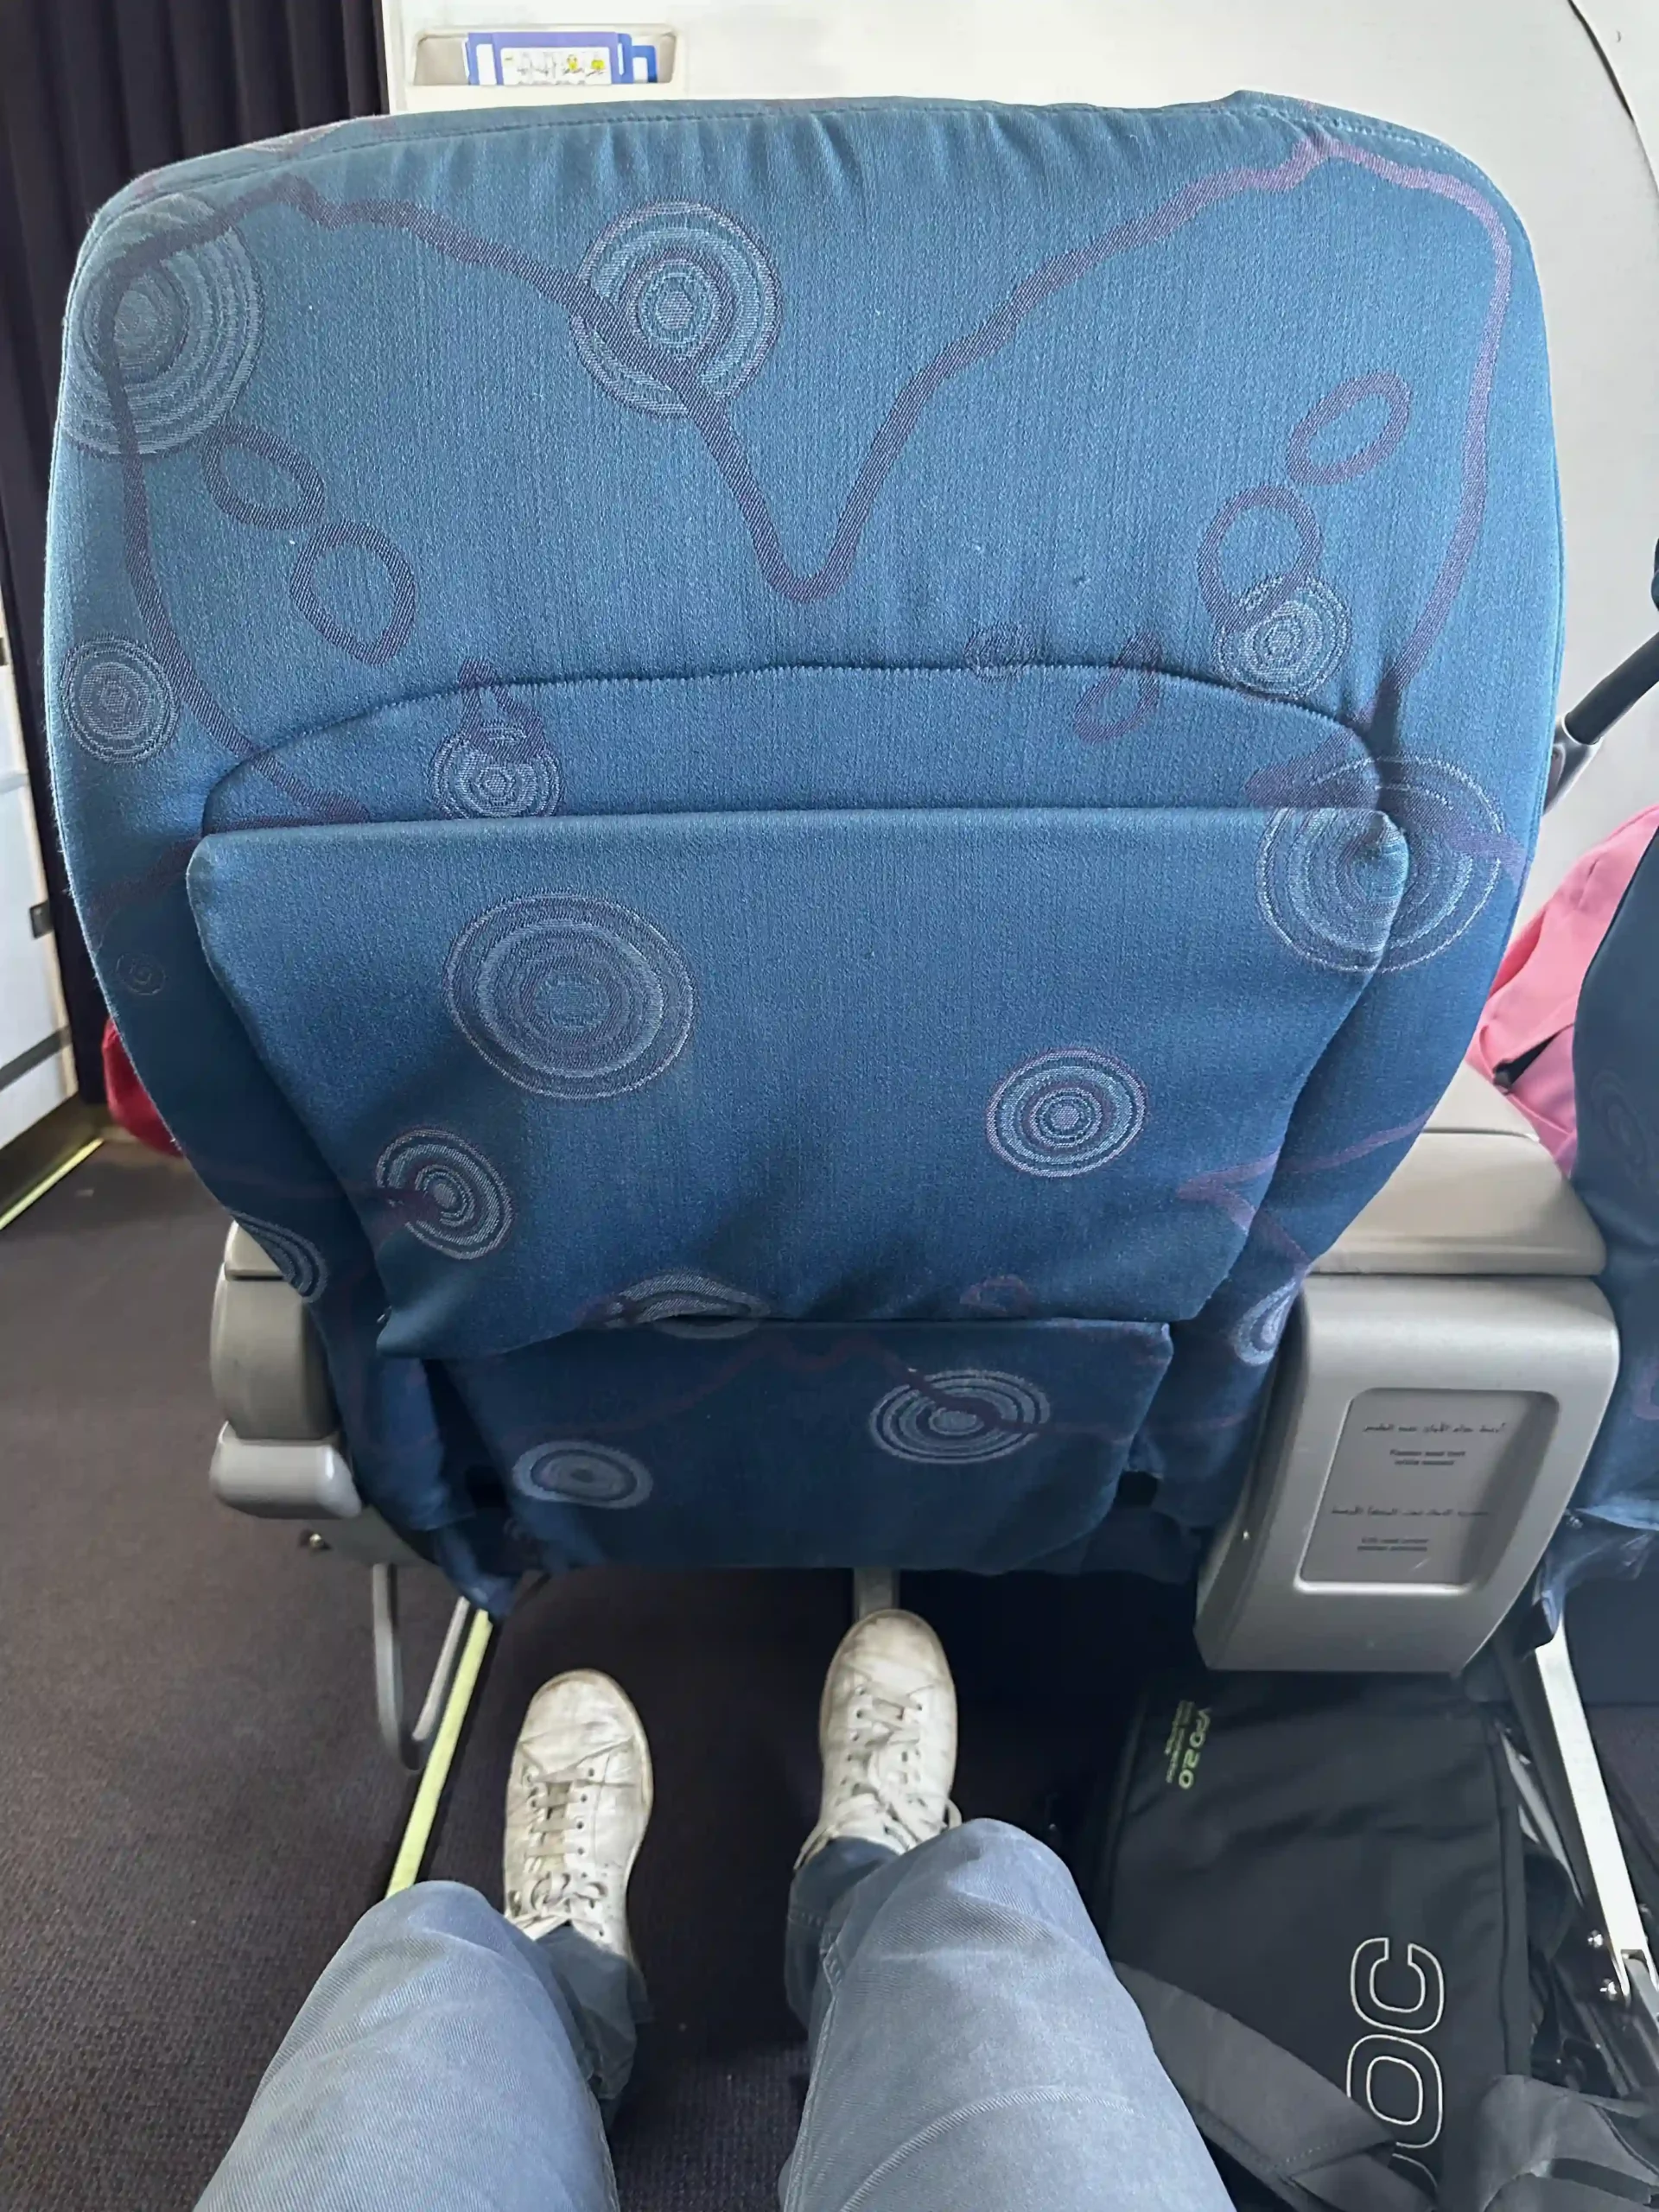 a person's feet in a blue seat